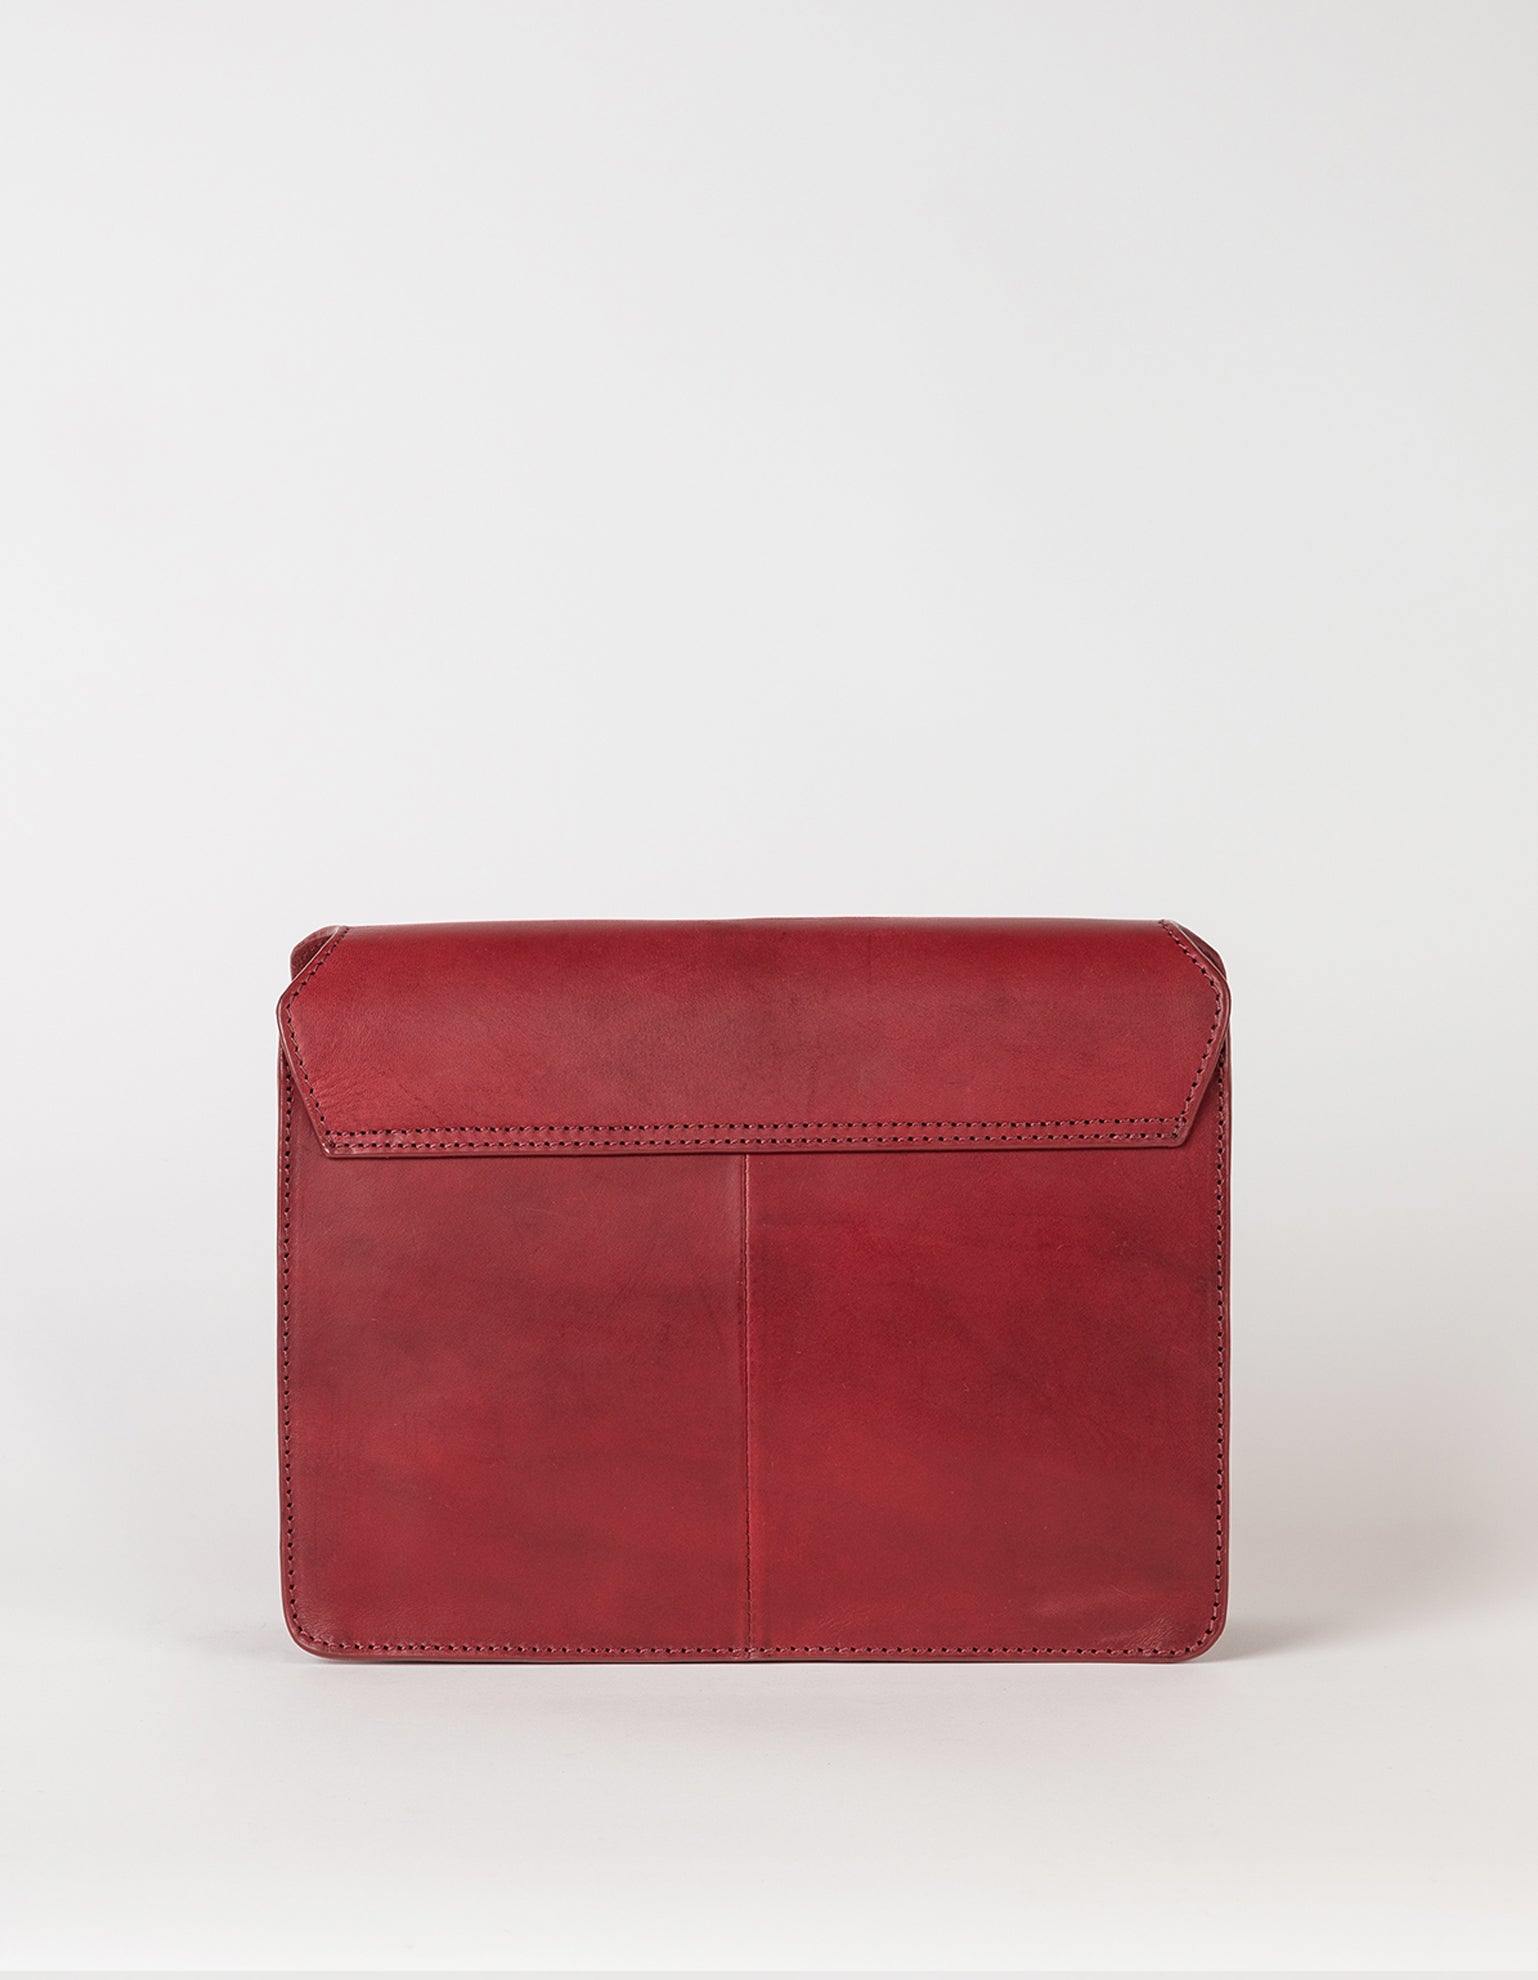 Audrey ruby classic leather bag- back product image